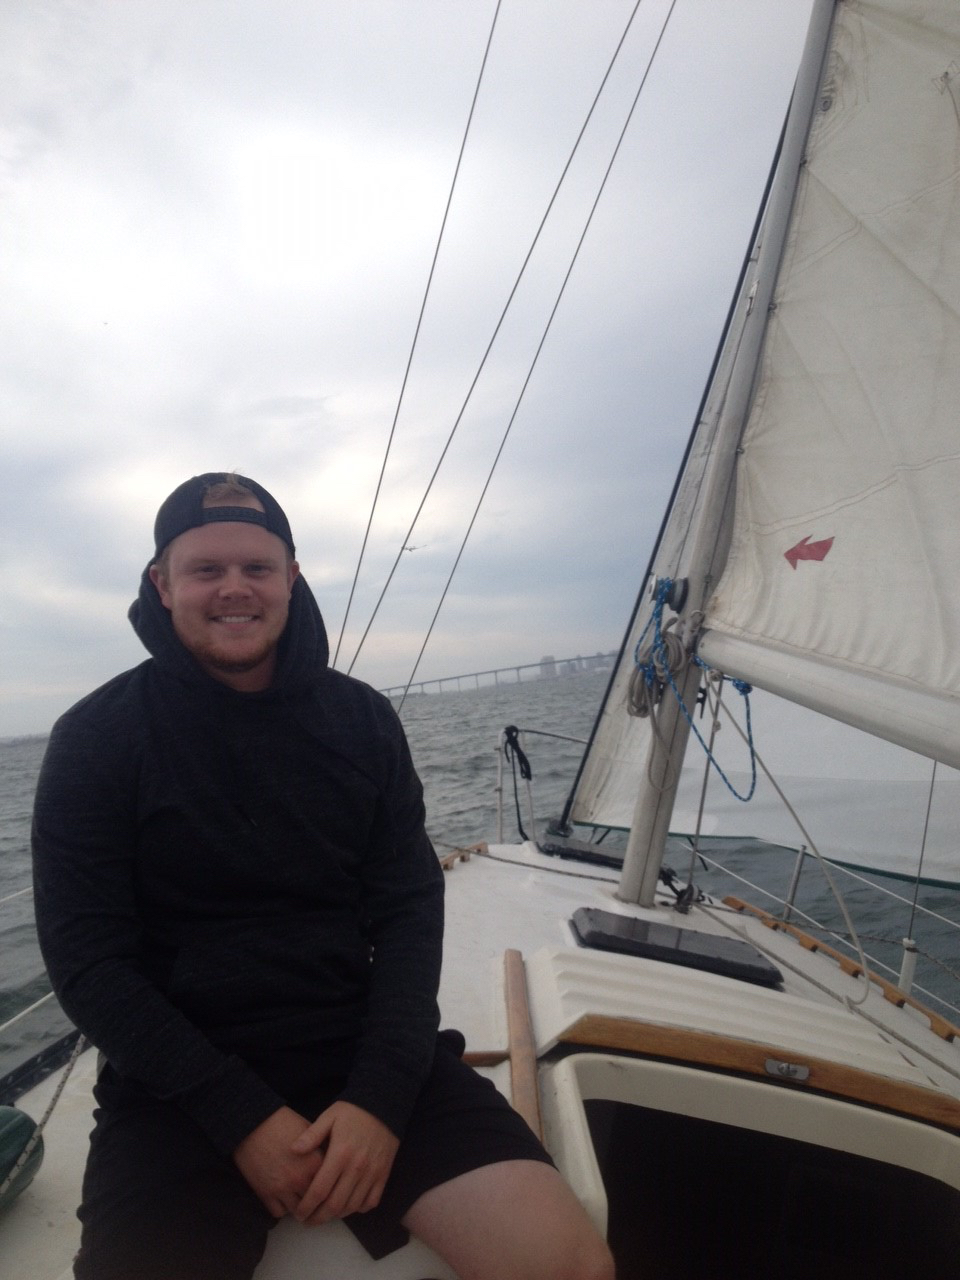 Michigan State University graduate Parker Murasky, hired as a safety engineer in San Diego, has taken advantage of the climate to learn sailing. (Courtesy photo)